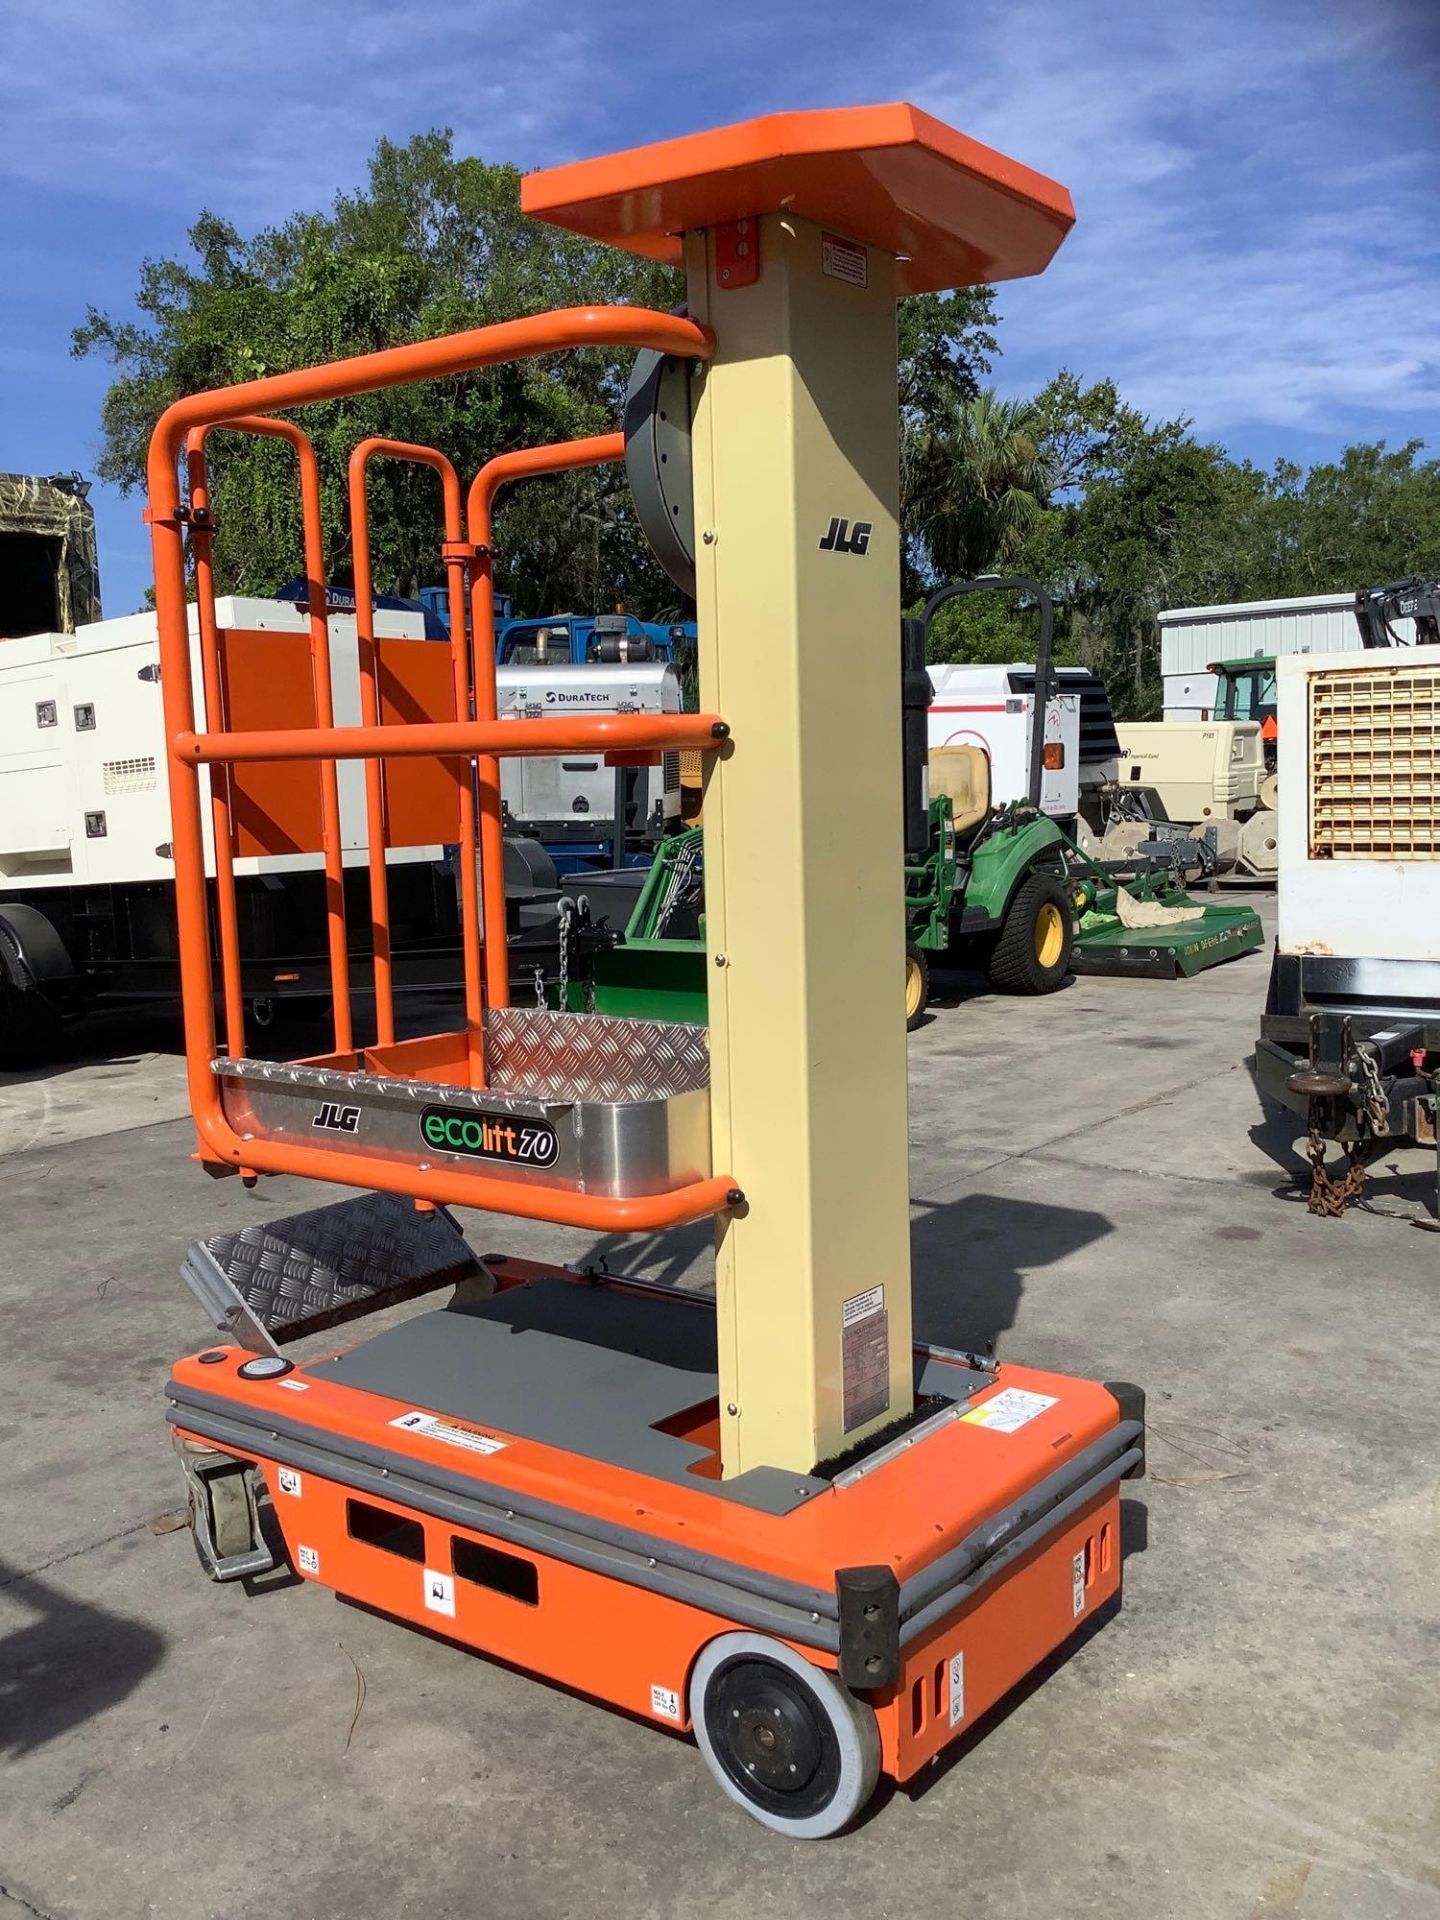 2018 JLG ECOLIFT 70,MANUAL, APPROX MAX PLATFORM HEIGHT 7FT, NON MARKING TIRES - Image 4 of 10